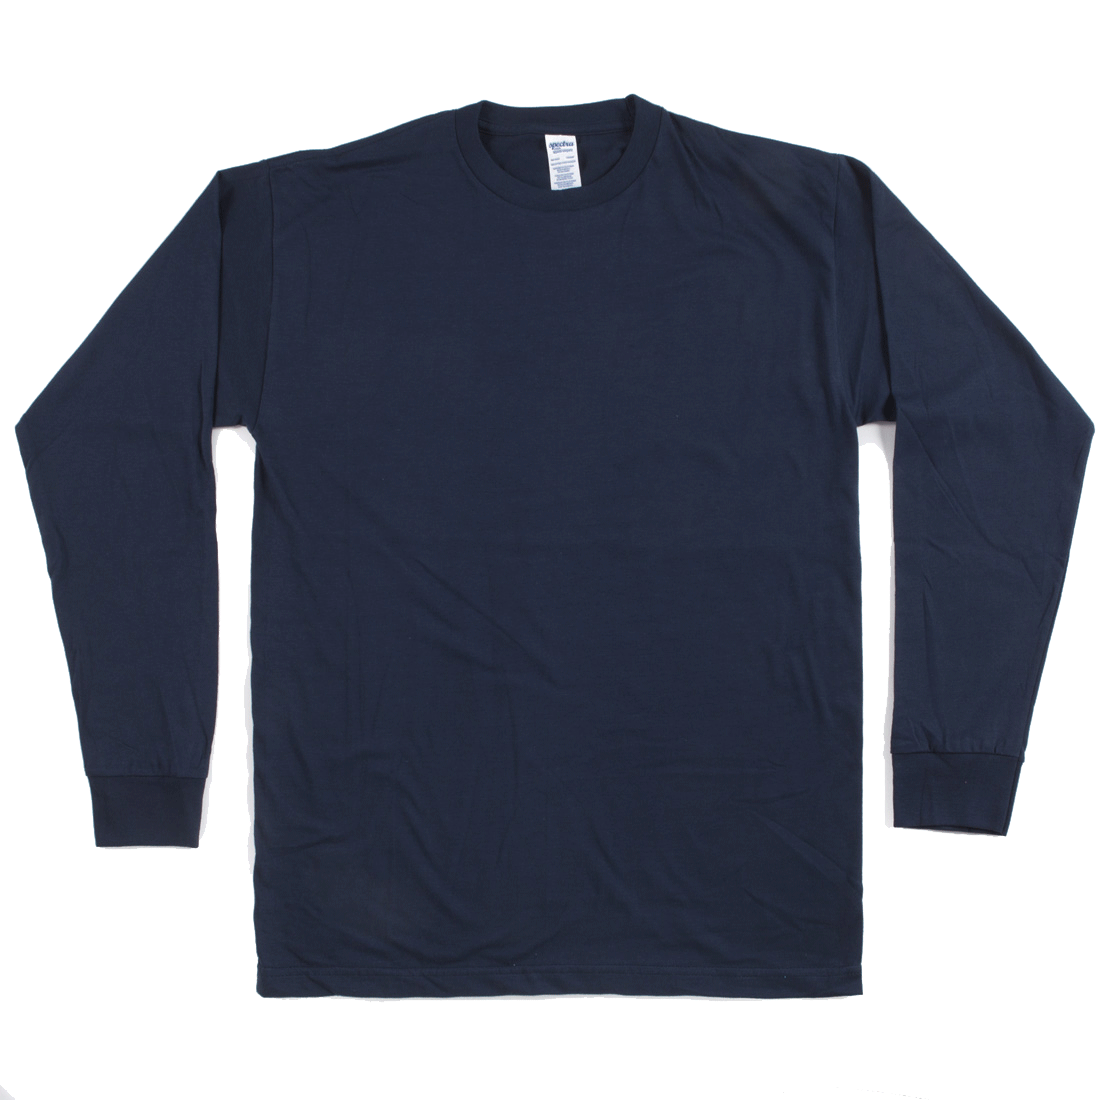 Spectra Long Sleeve T-Shirt 3055 | Screen Printing, Embroidery and ...